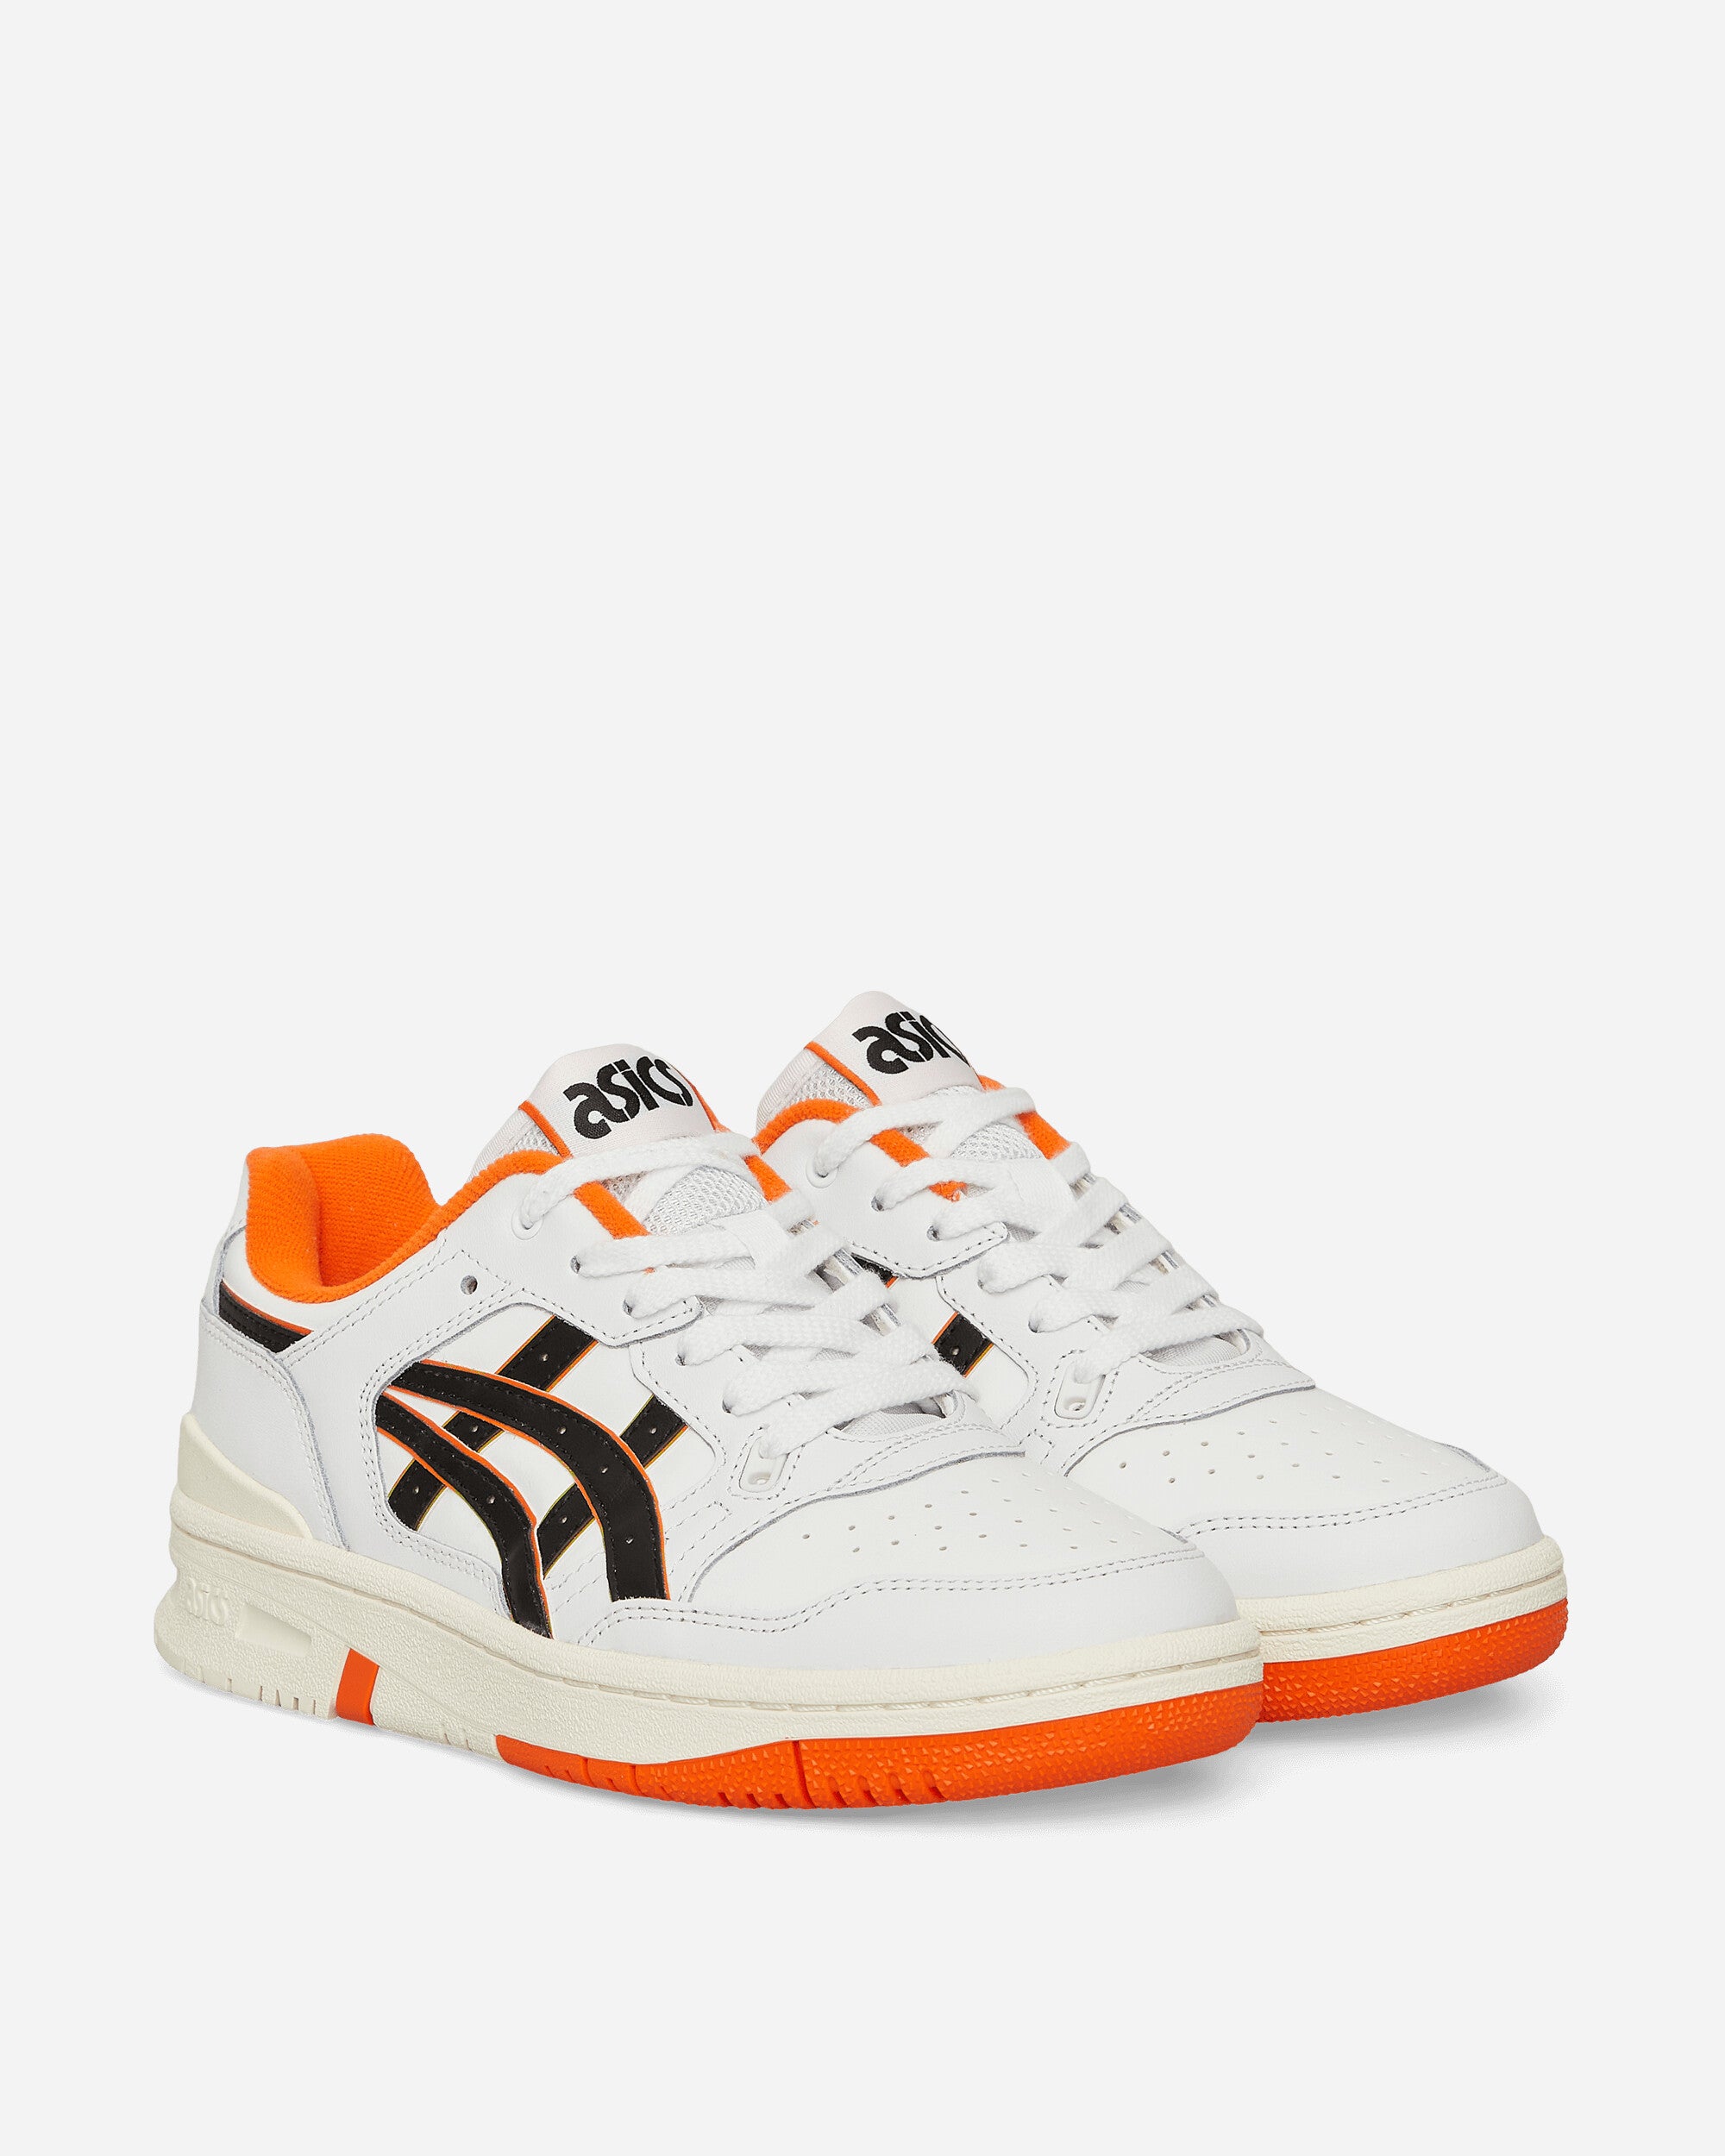 Asics Ex89 White/Habanero Sneakers Low 1201A476-109